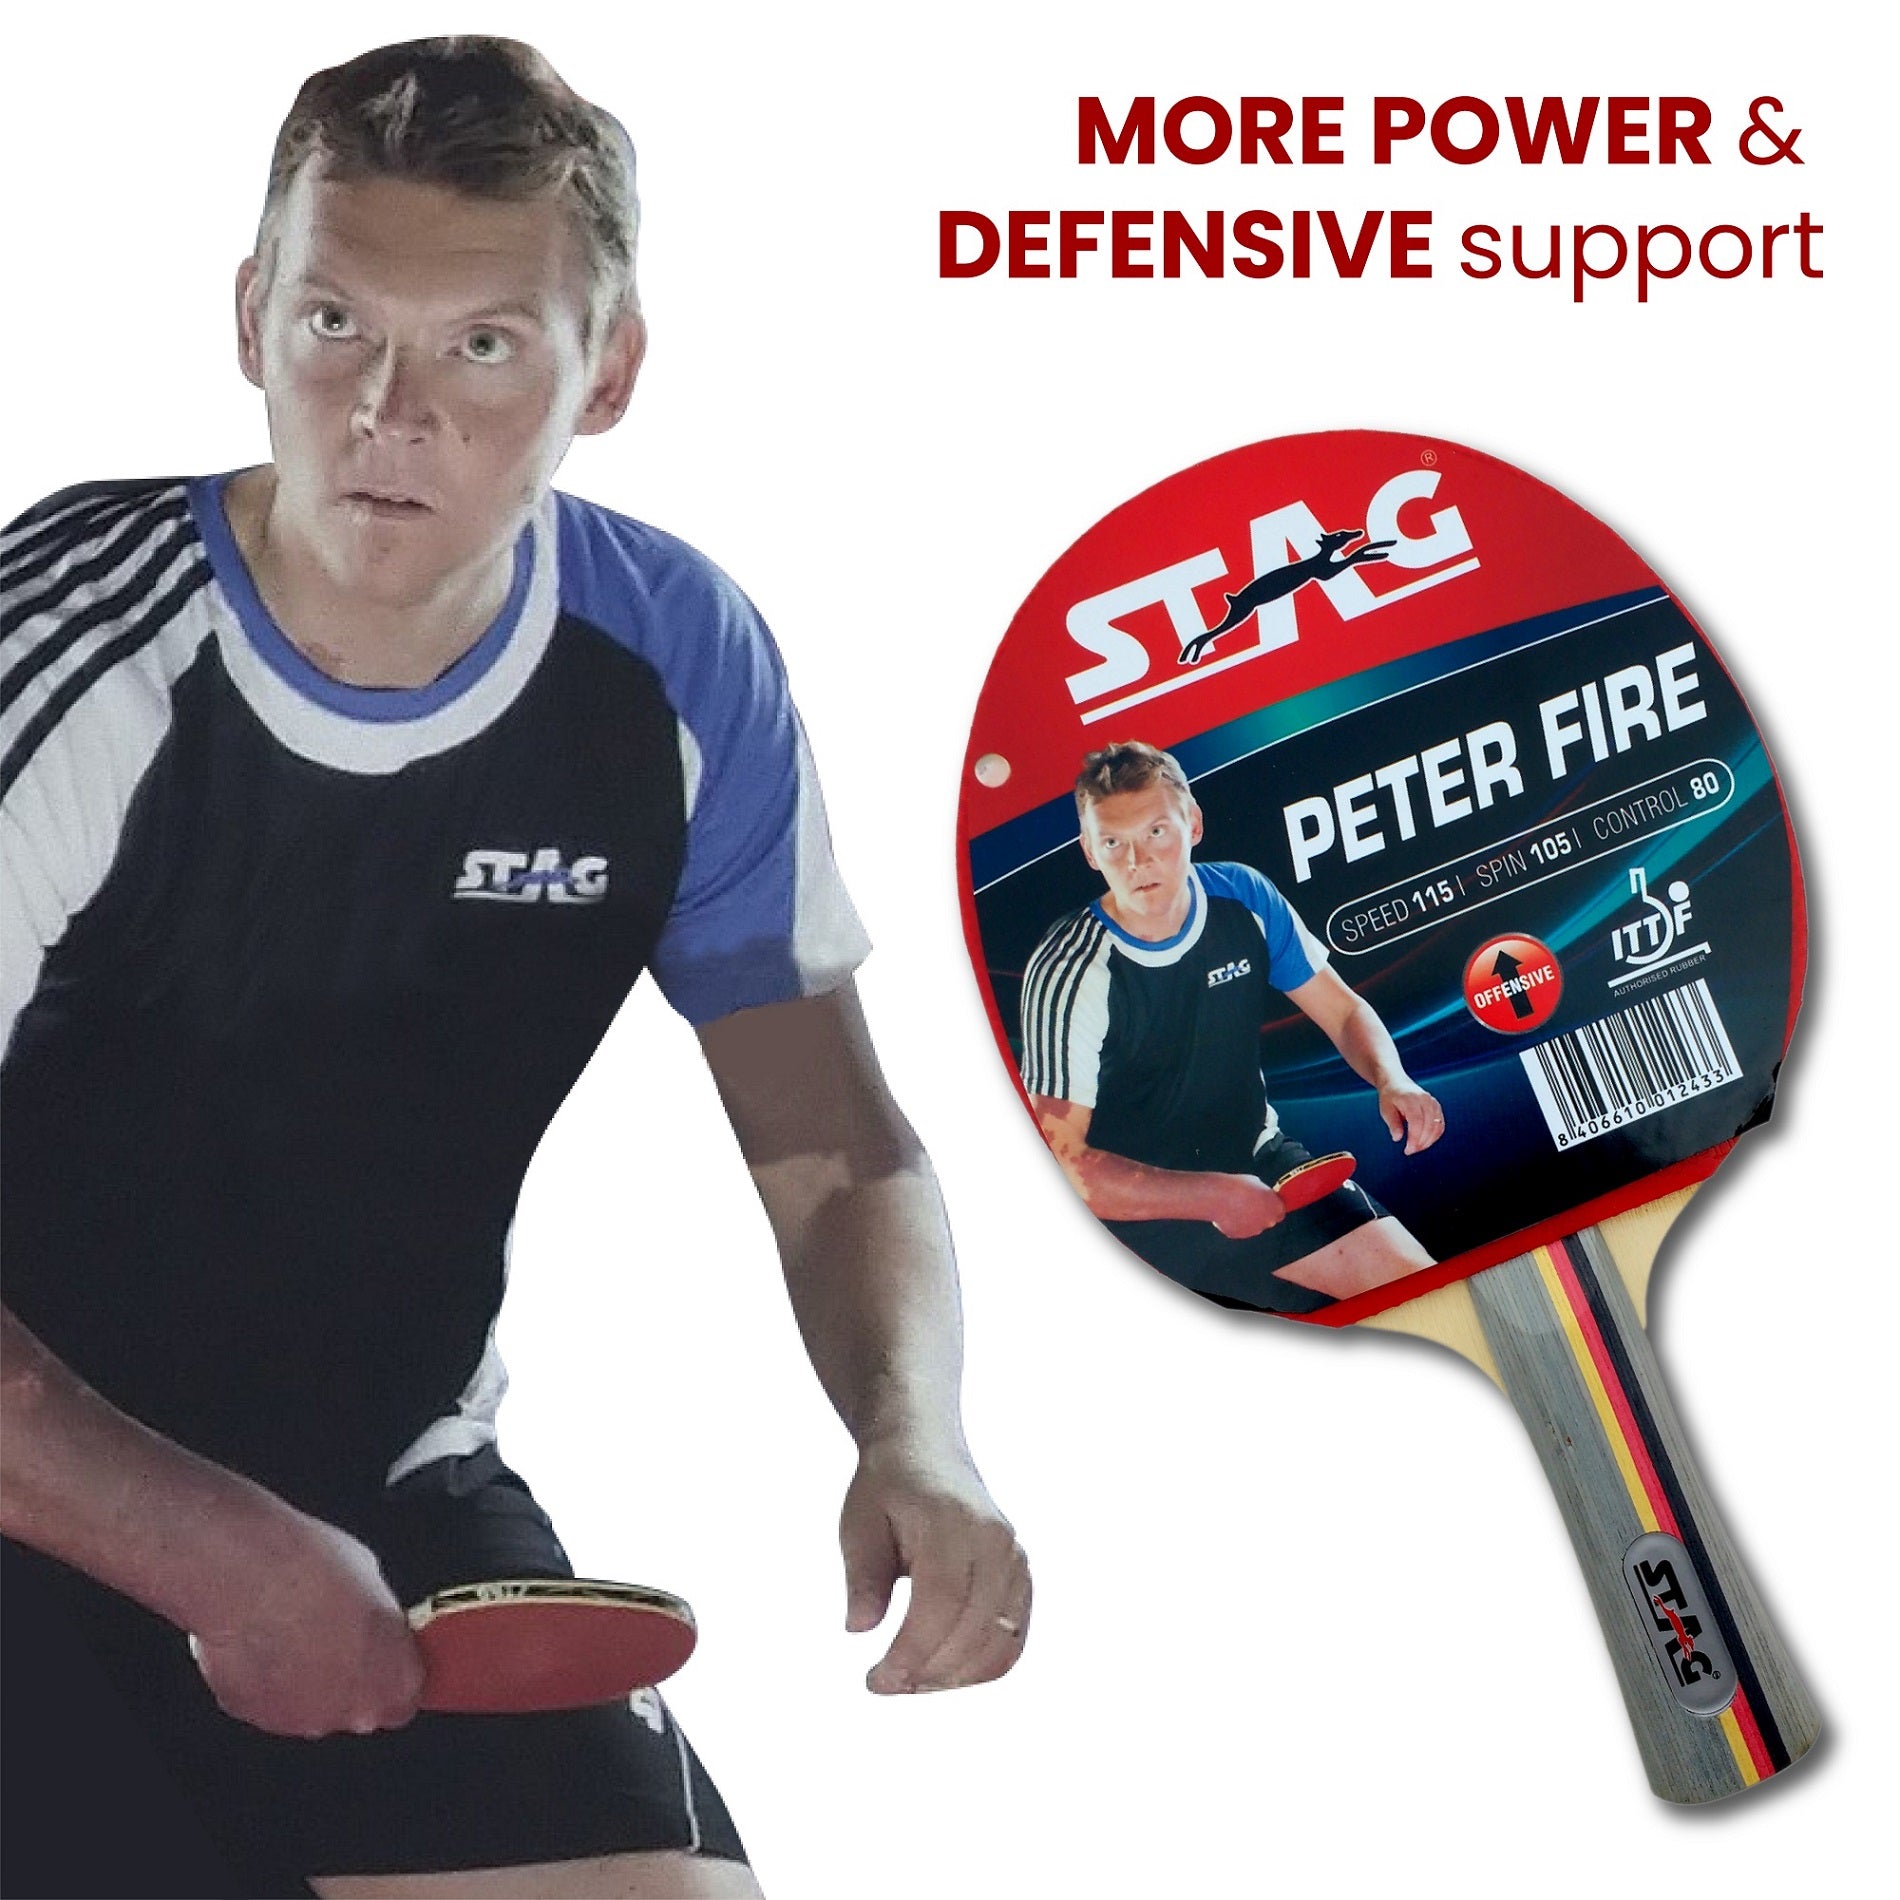 Stag Peter Fire Table Tennis Racquet with wooden box